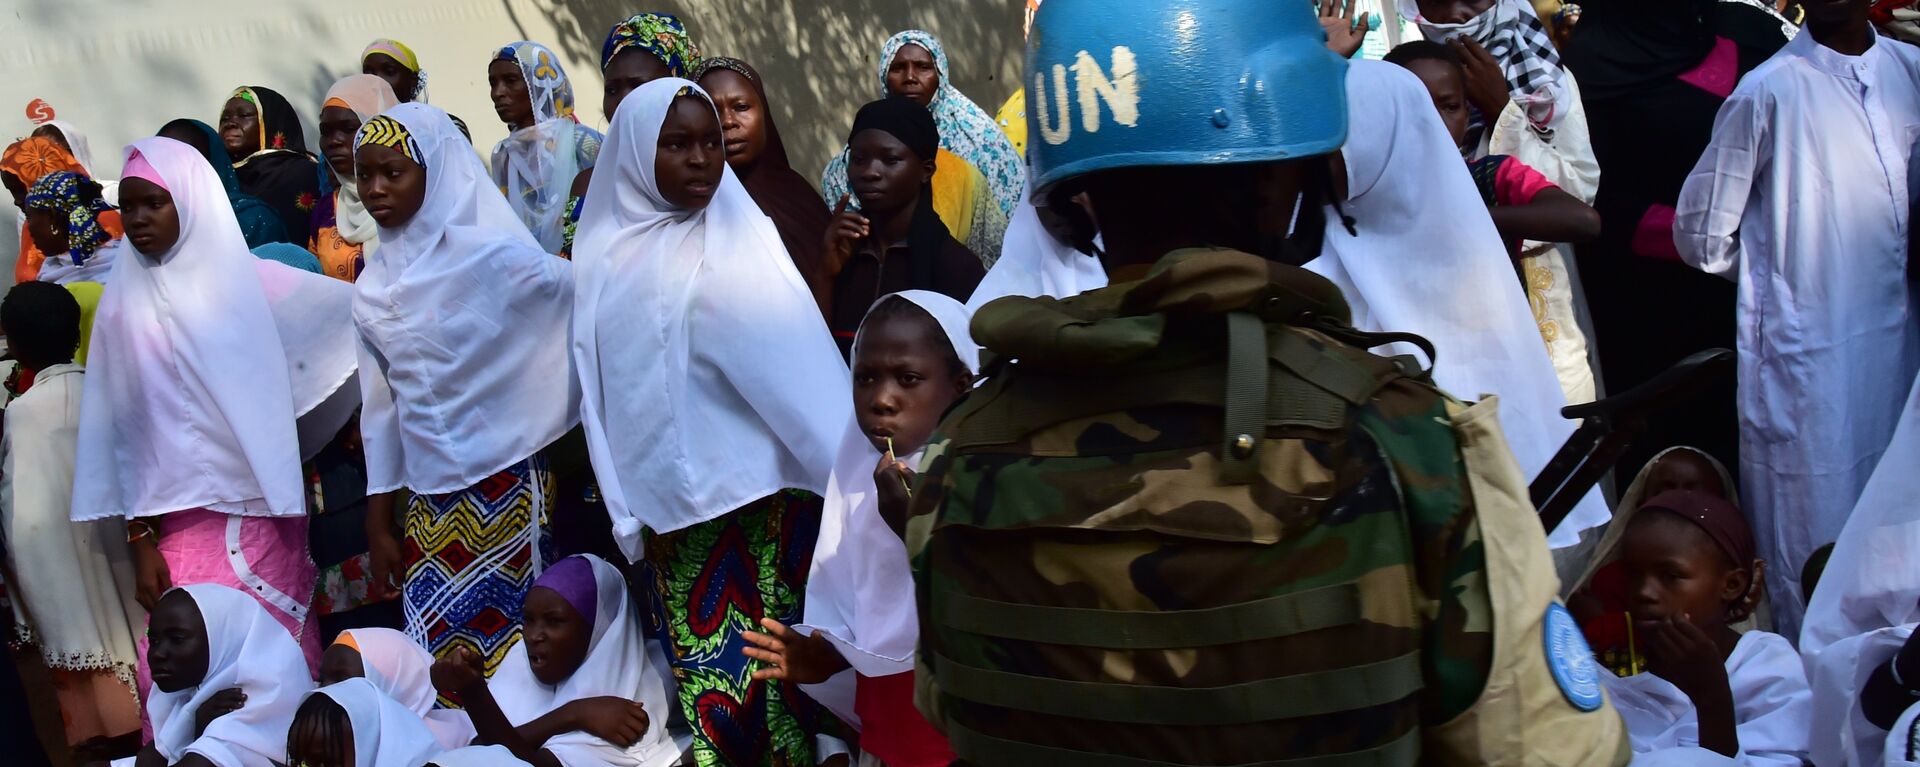 A soldier of the United Nations (UN) stands guard next to girls and women at the Bangui Mosque, Central African Republic, on November 30, 2015. - Sputnik International, 1920, 04.11.2022